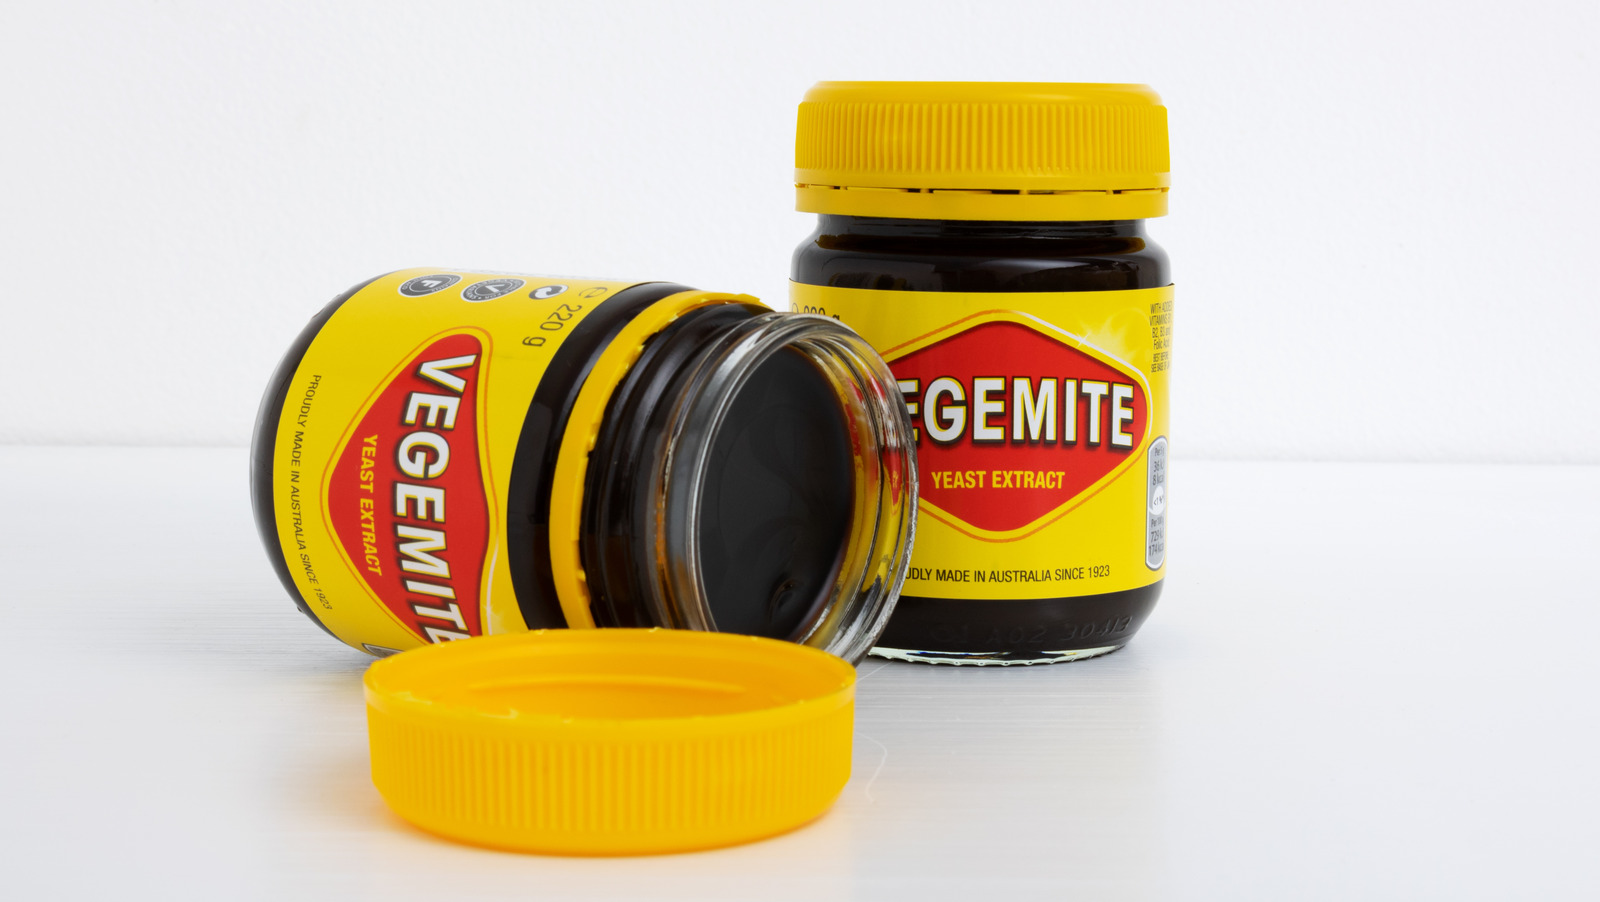 What Is Vegemite And What Does It Taste Like?